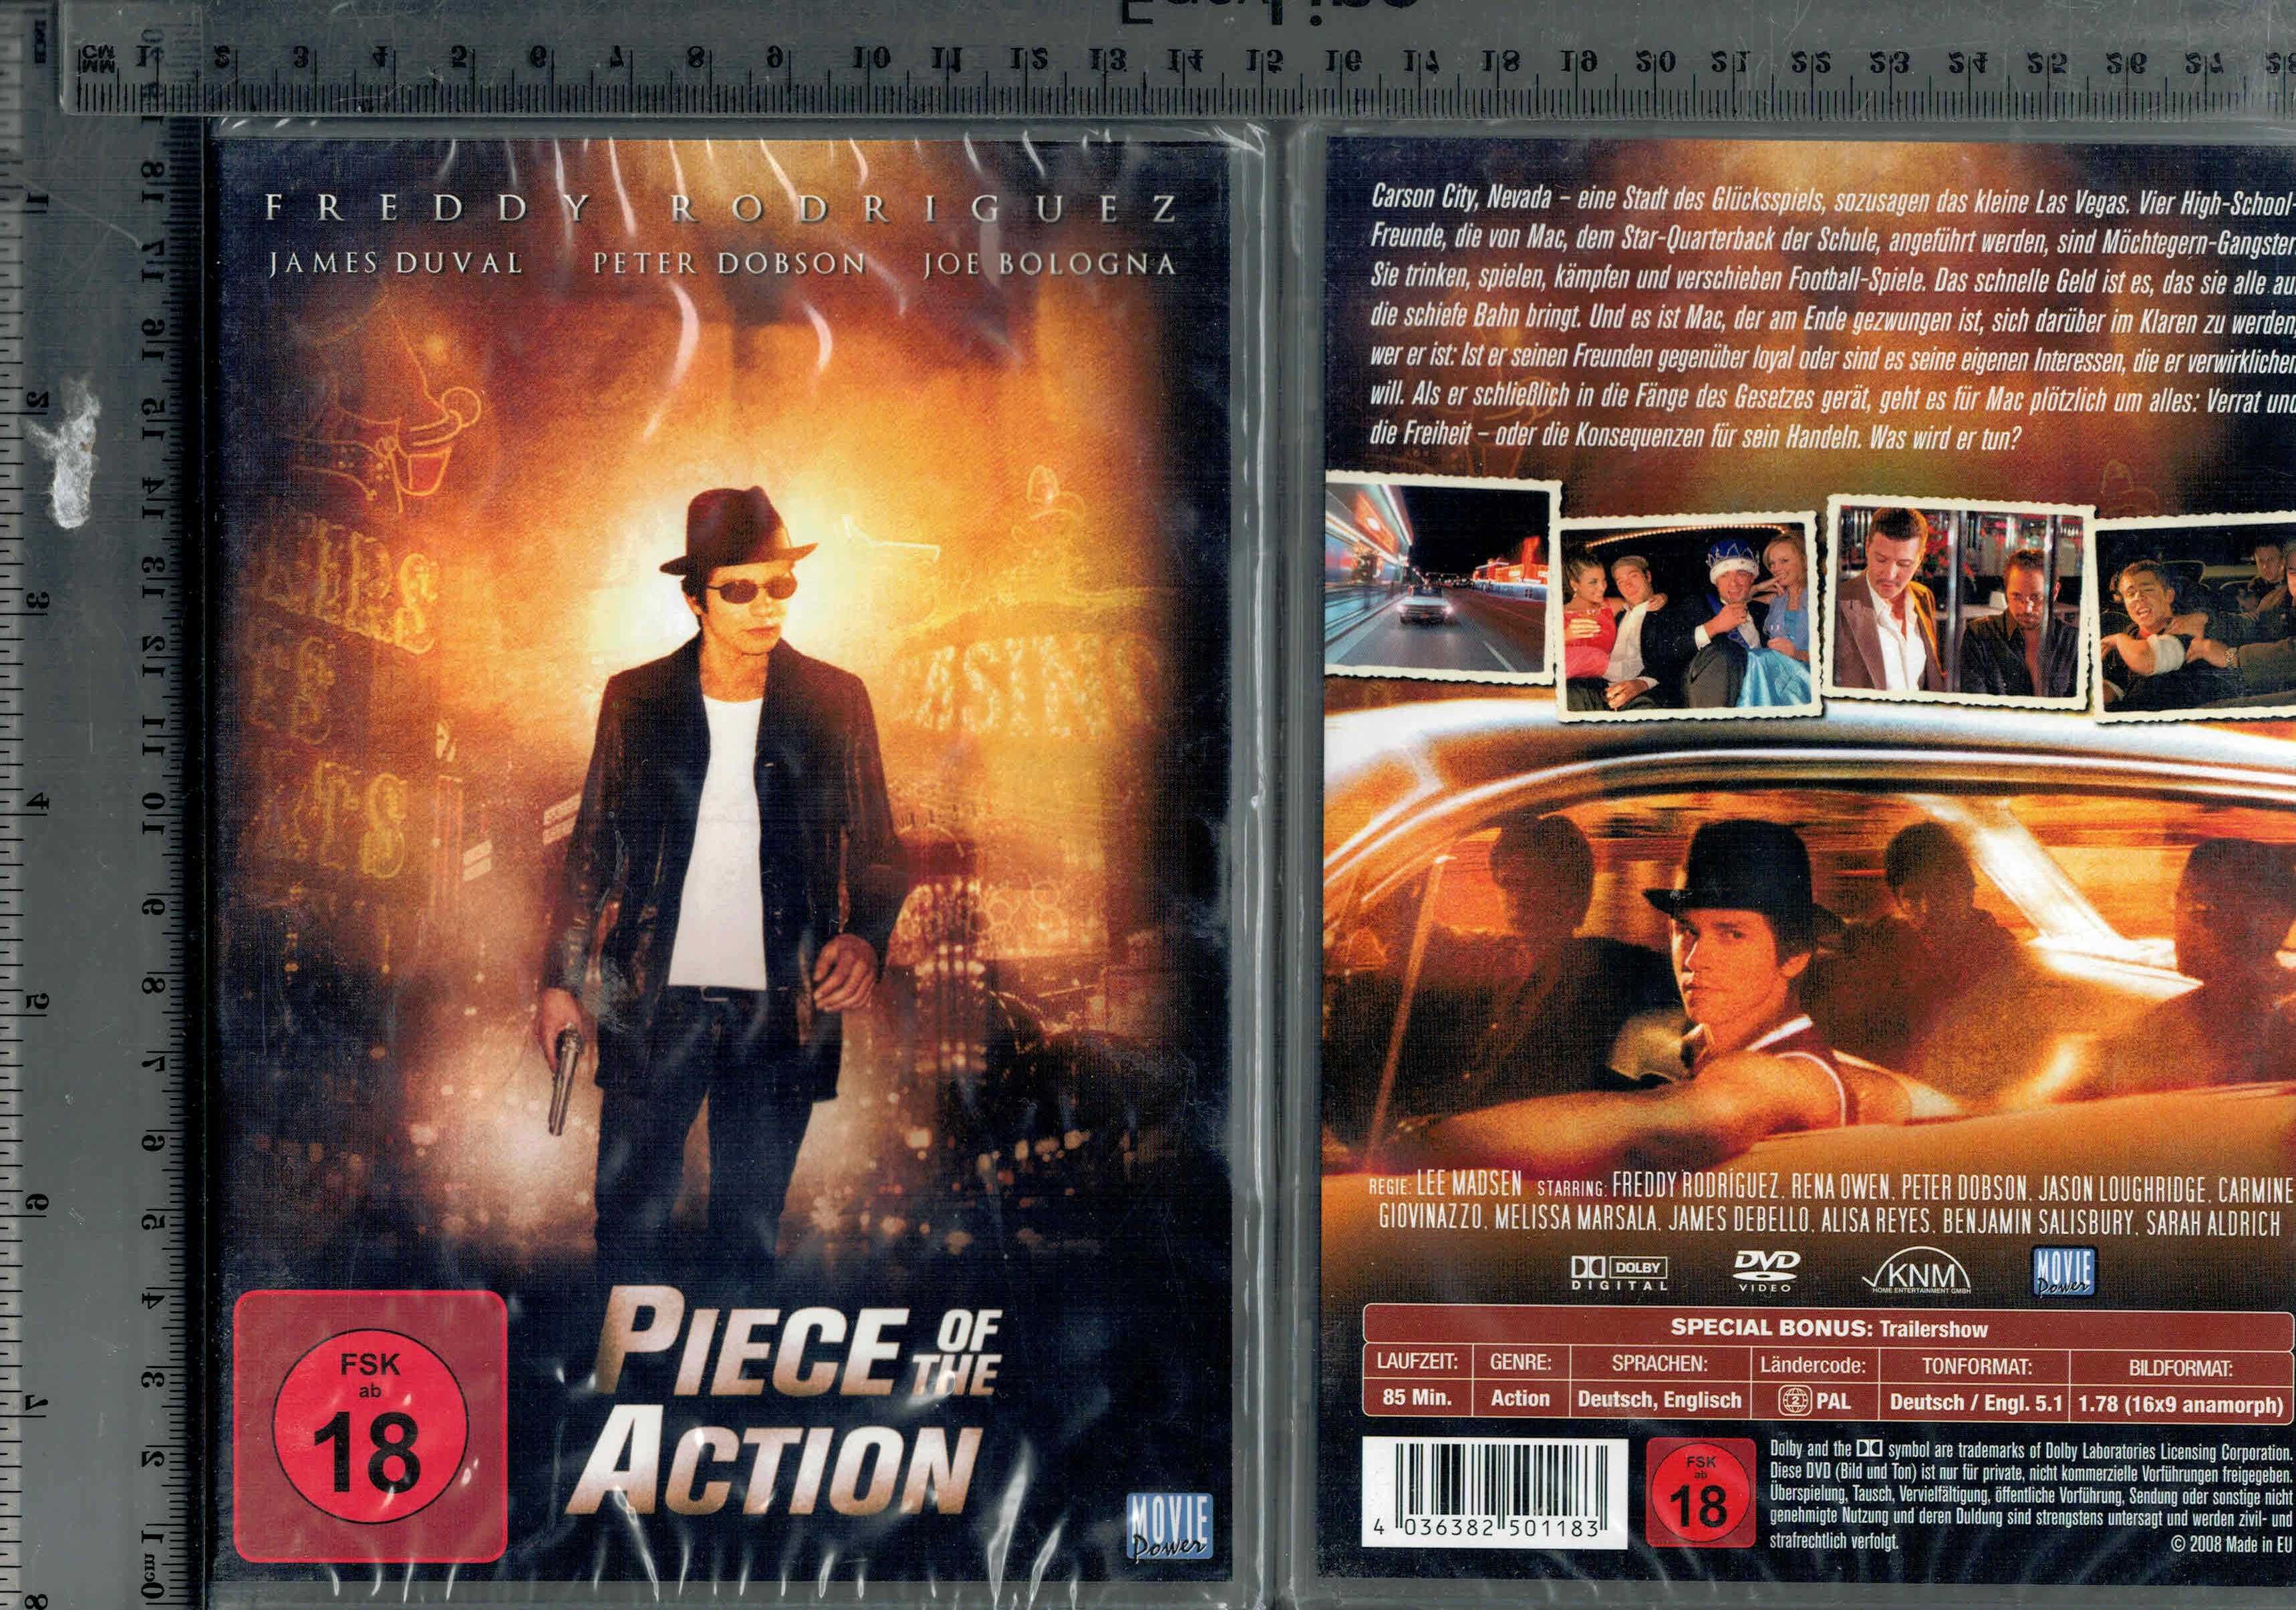 Piece of the action Freddy Rodriguez DVD